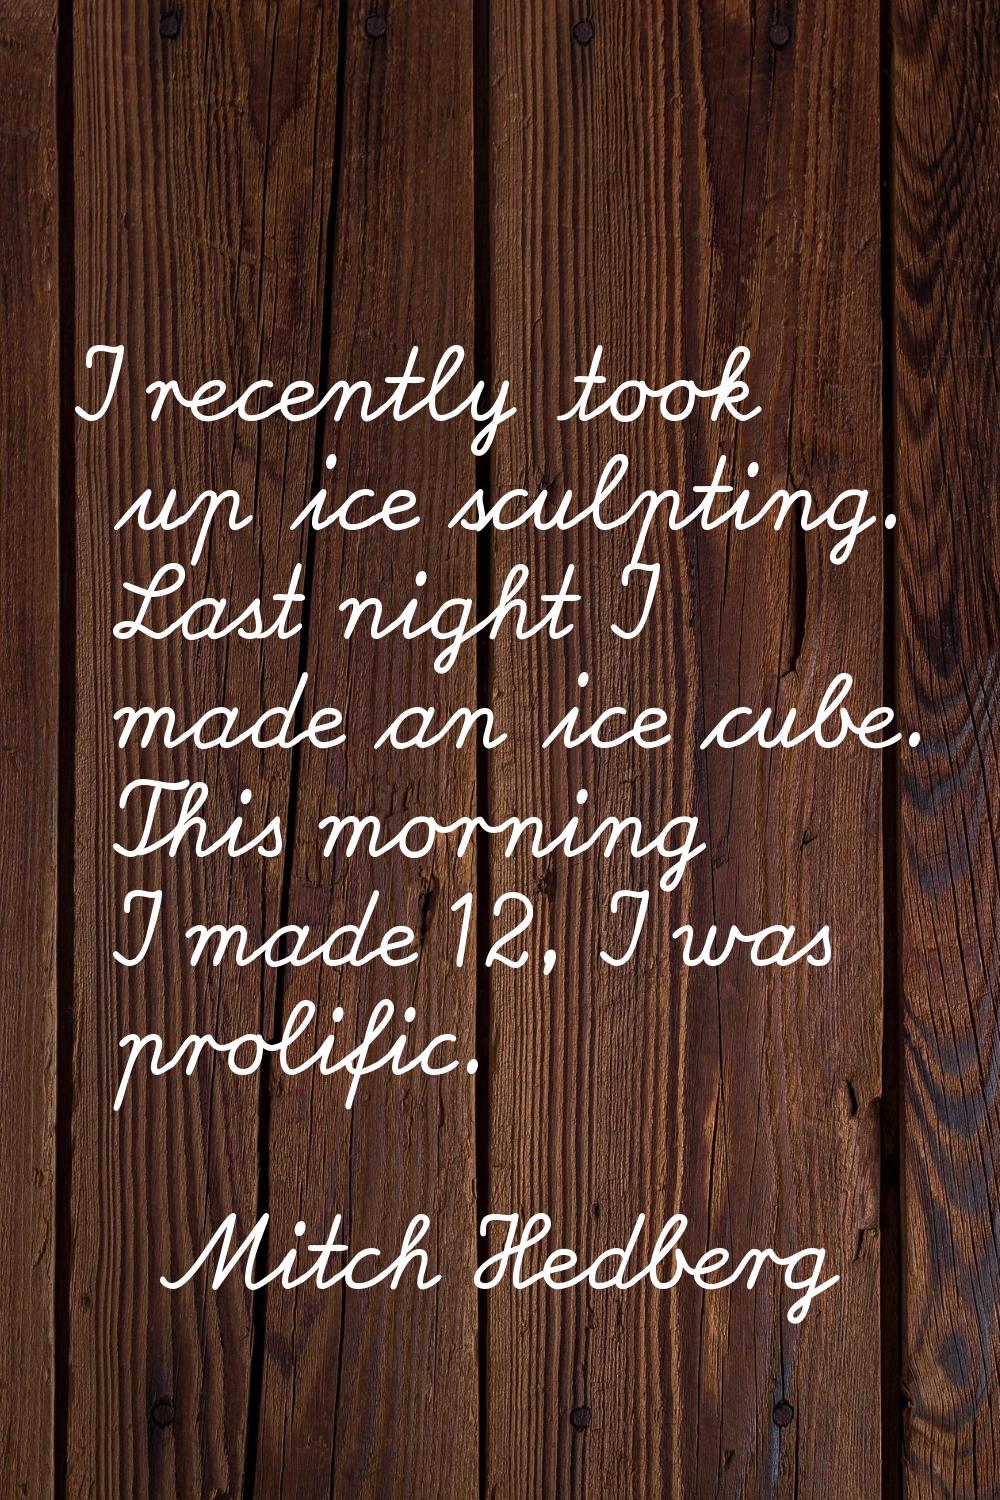 I recently took up ice sculpting. Last night I made an ice cube. This morning I made 12, I was prol